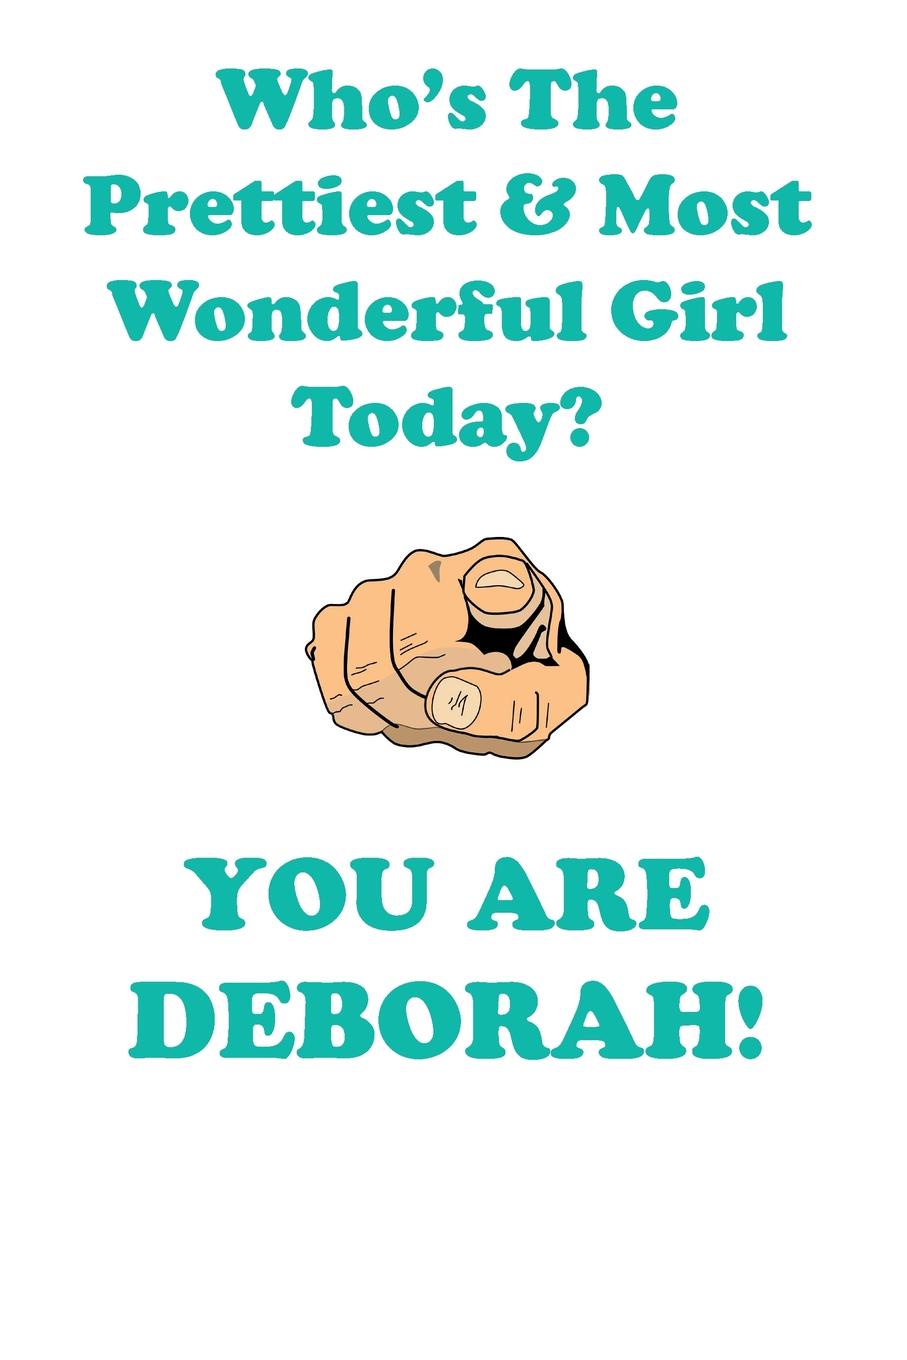 DEBORAH is The Prettiest Affirmations Workbook Positive Affirmations Workbook Includes. Mentoring Questions, Guidance, Supporting You